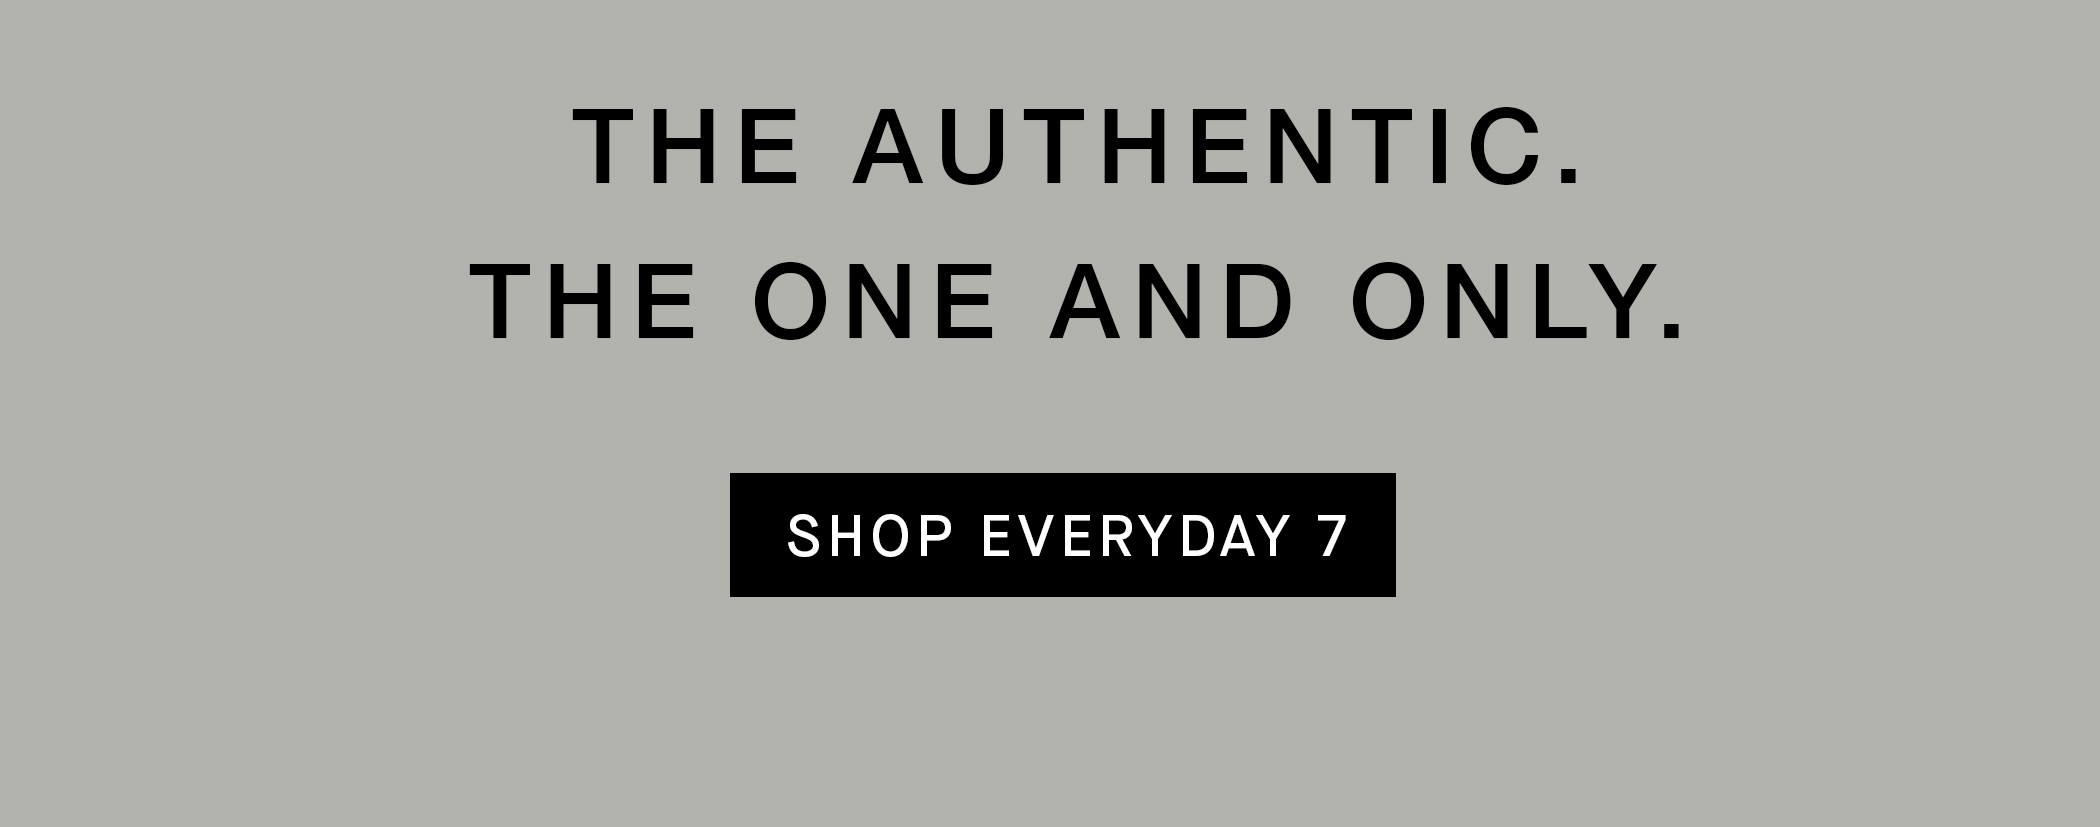 THE AUTHENTIC. THE ONE AND ONLY. SHOP EVERYDAY 7 